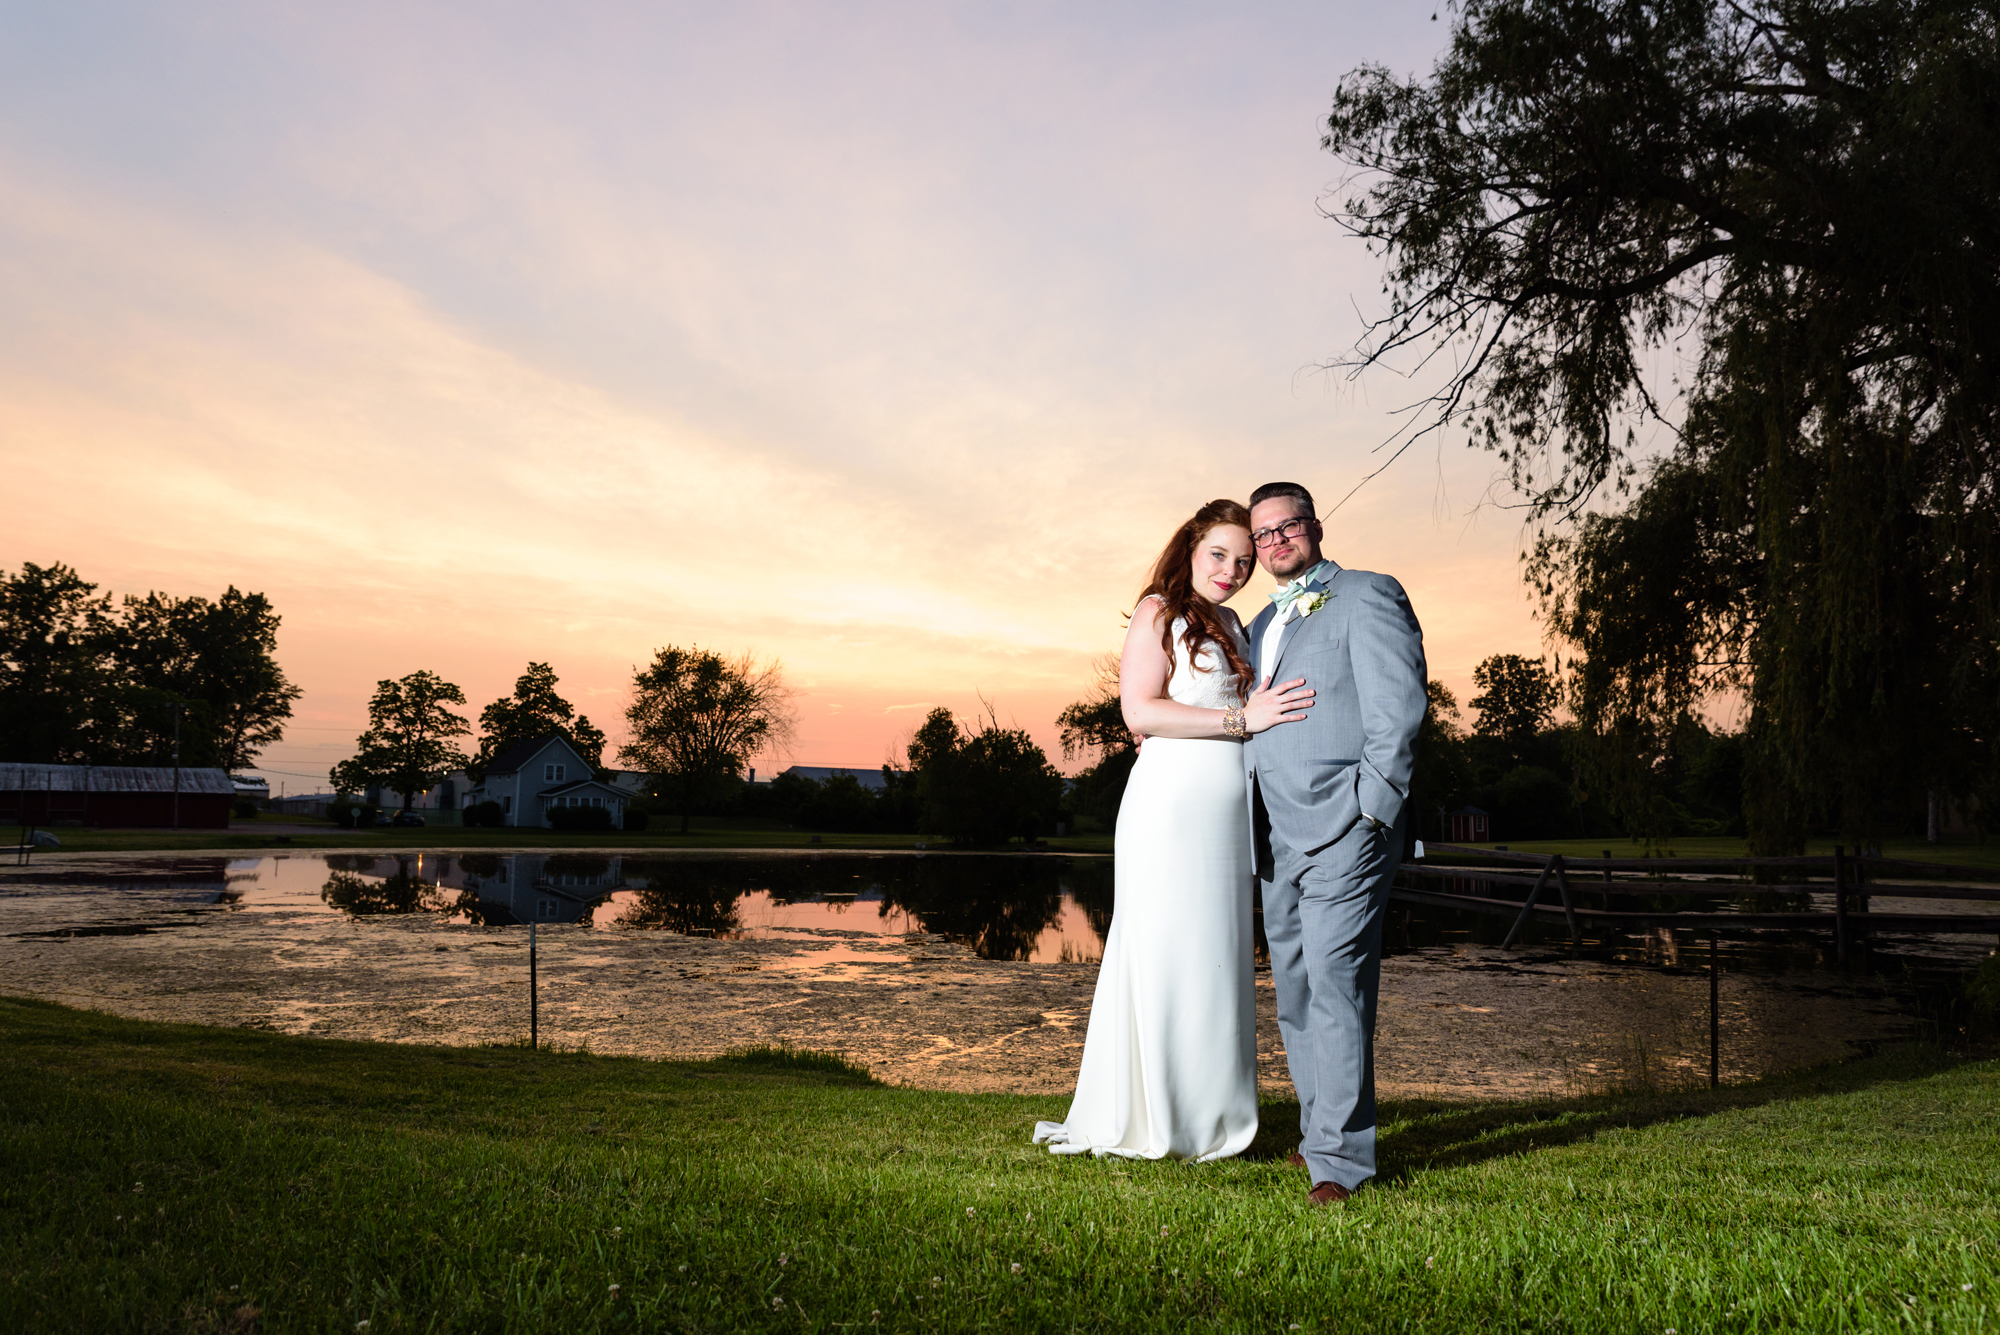 Sunset photo of a Bride & Groom at a wedding at Amish Acres